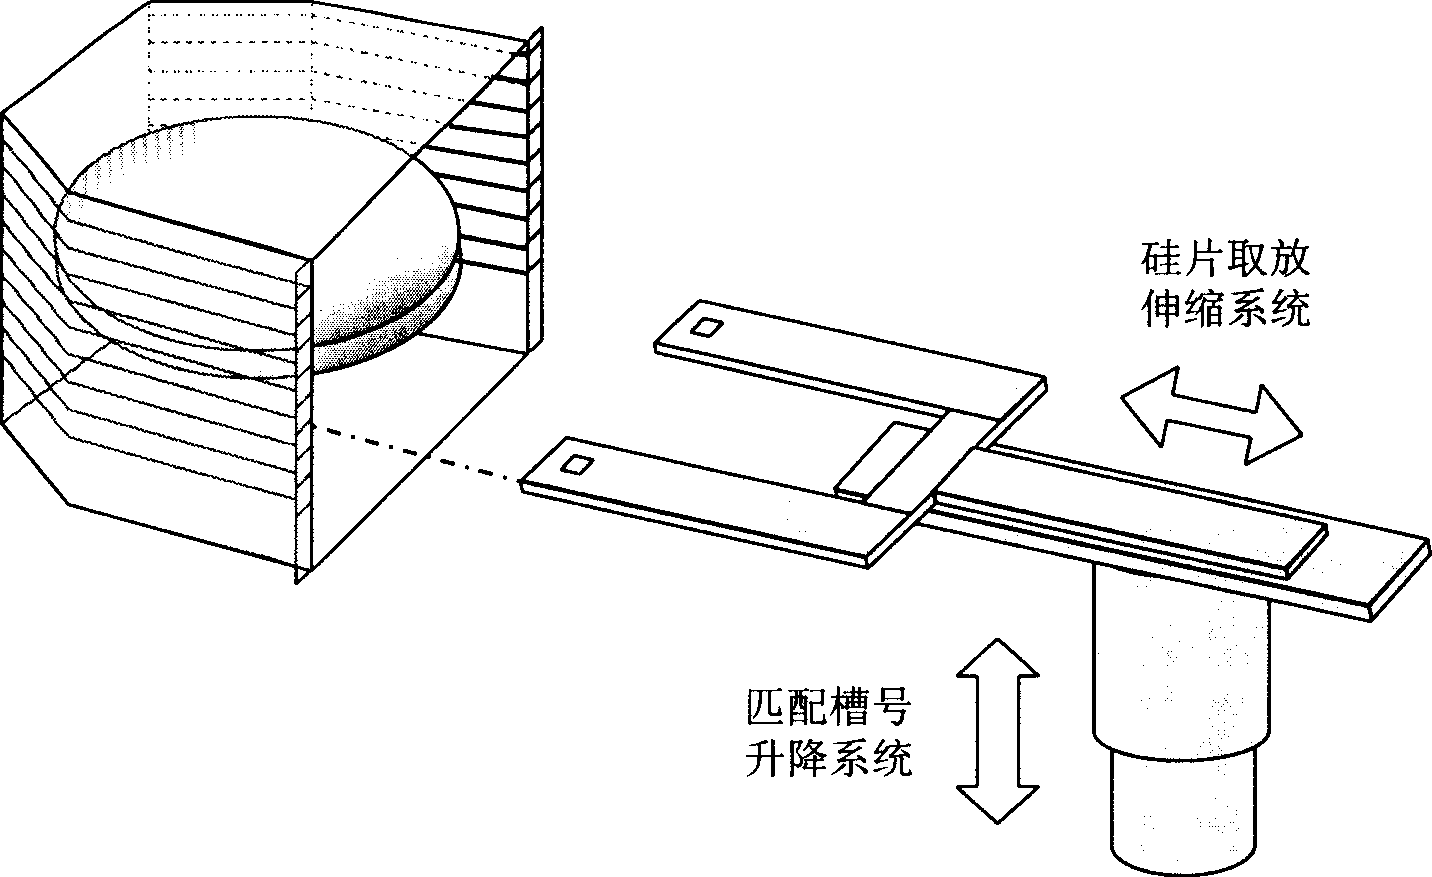 Manil putor automatic silicon-wafer grabbing system and method